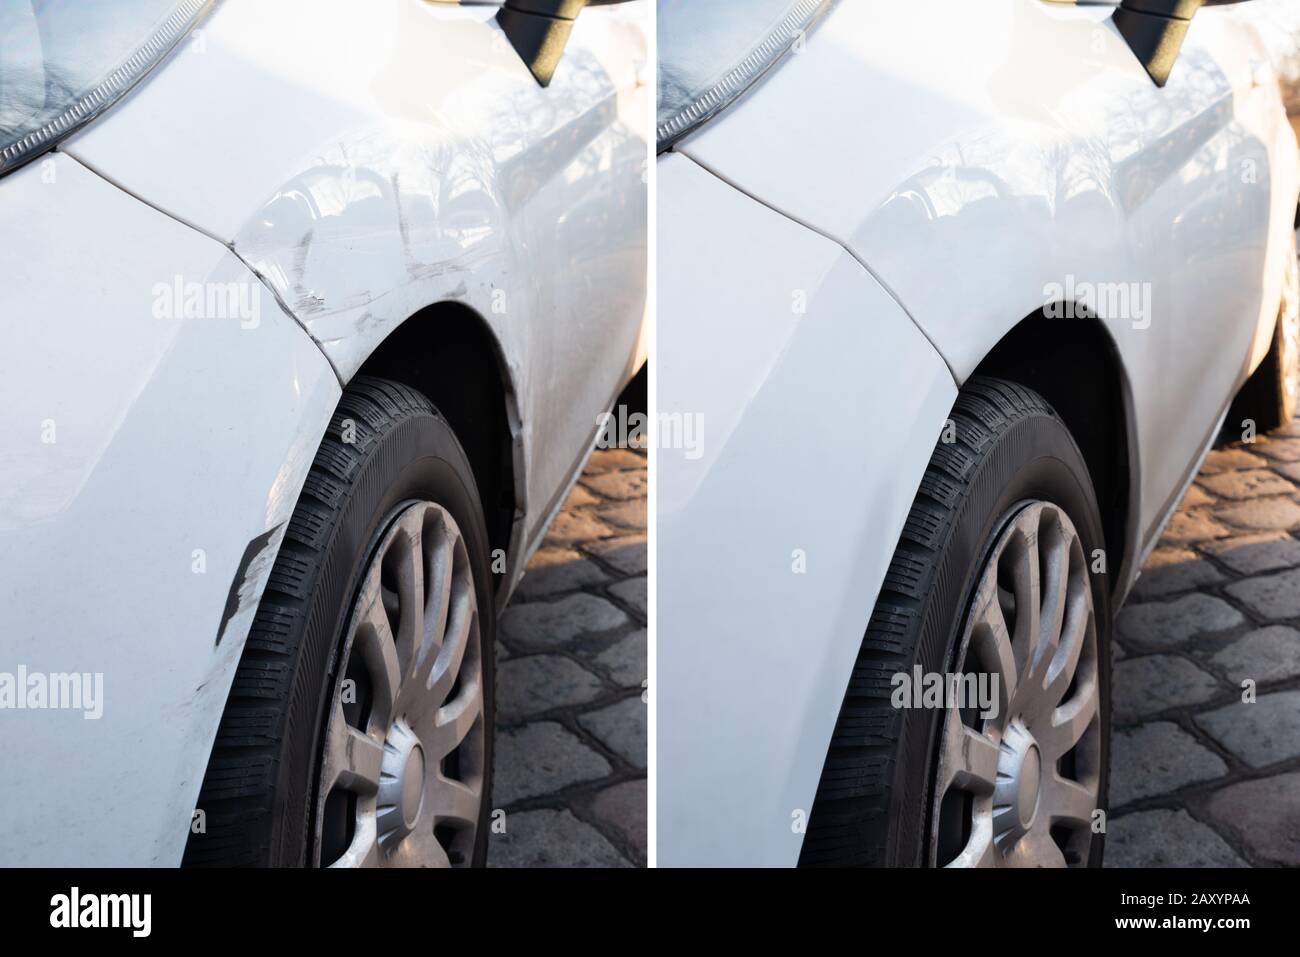 https://c8.alamy.com/comp/2AXYPAA/photo-of-car-dent-repair-before-and-after-2AXYPAA.jpg